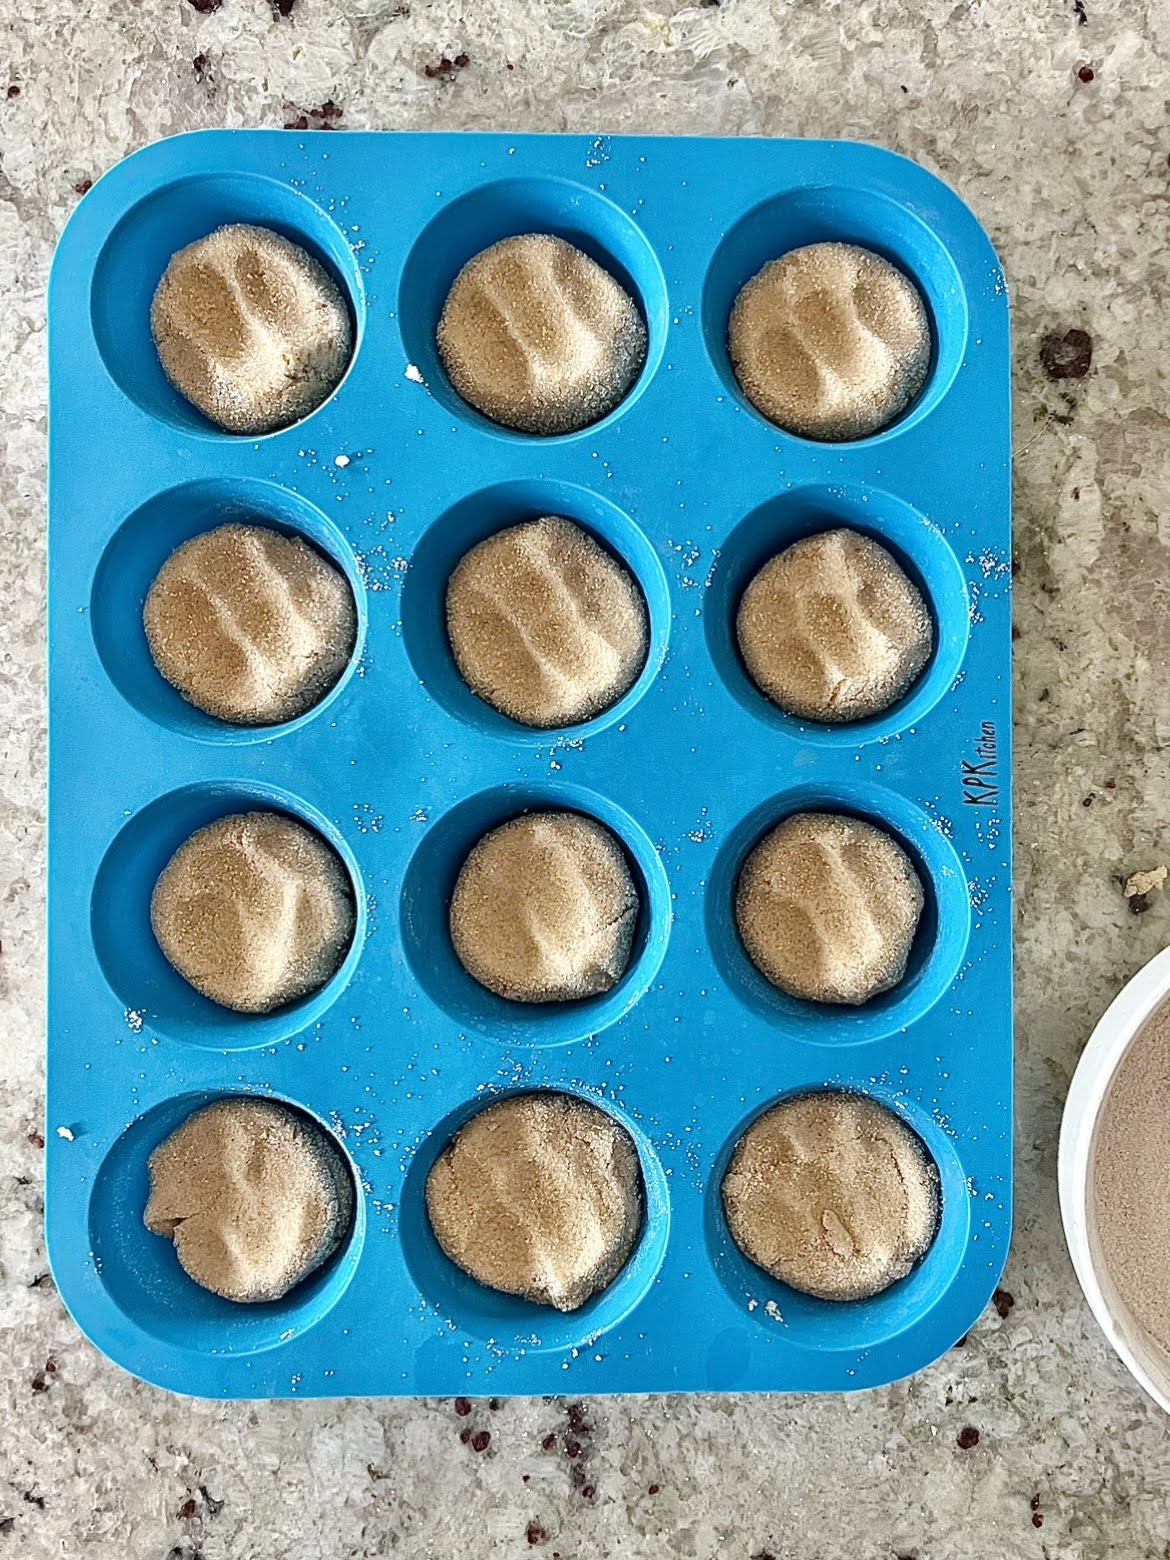 A process photo of the cookie dough pressed into the muffin tins prior to baking